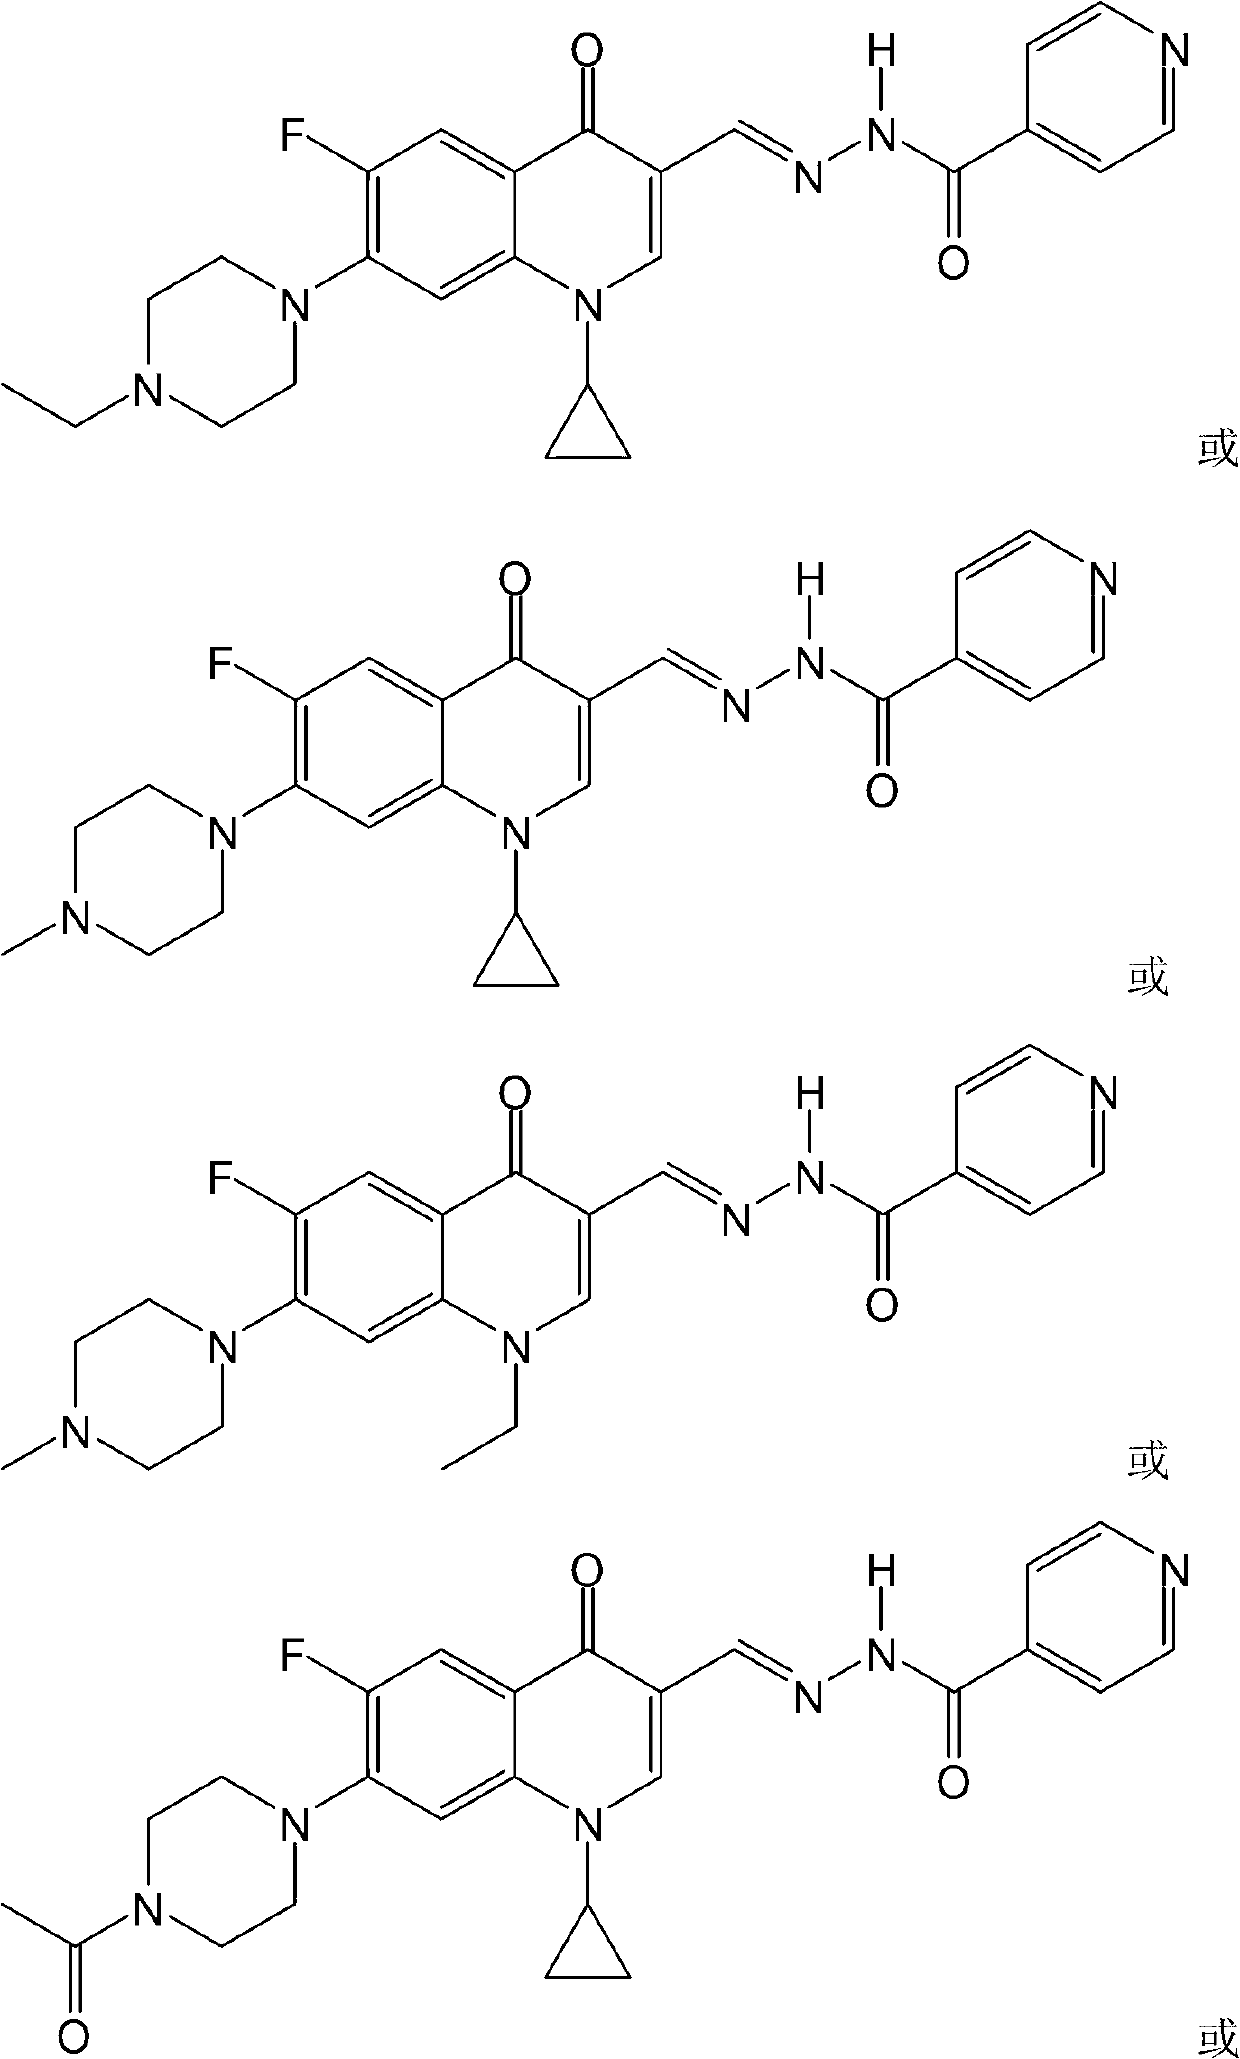 Fluoroquinolone acetal ftivazide as well as preparation method and application thereof